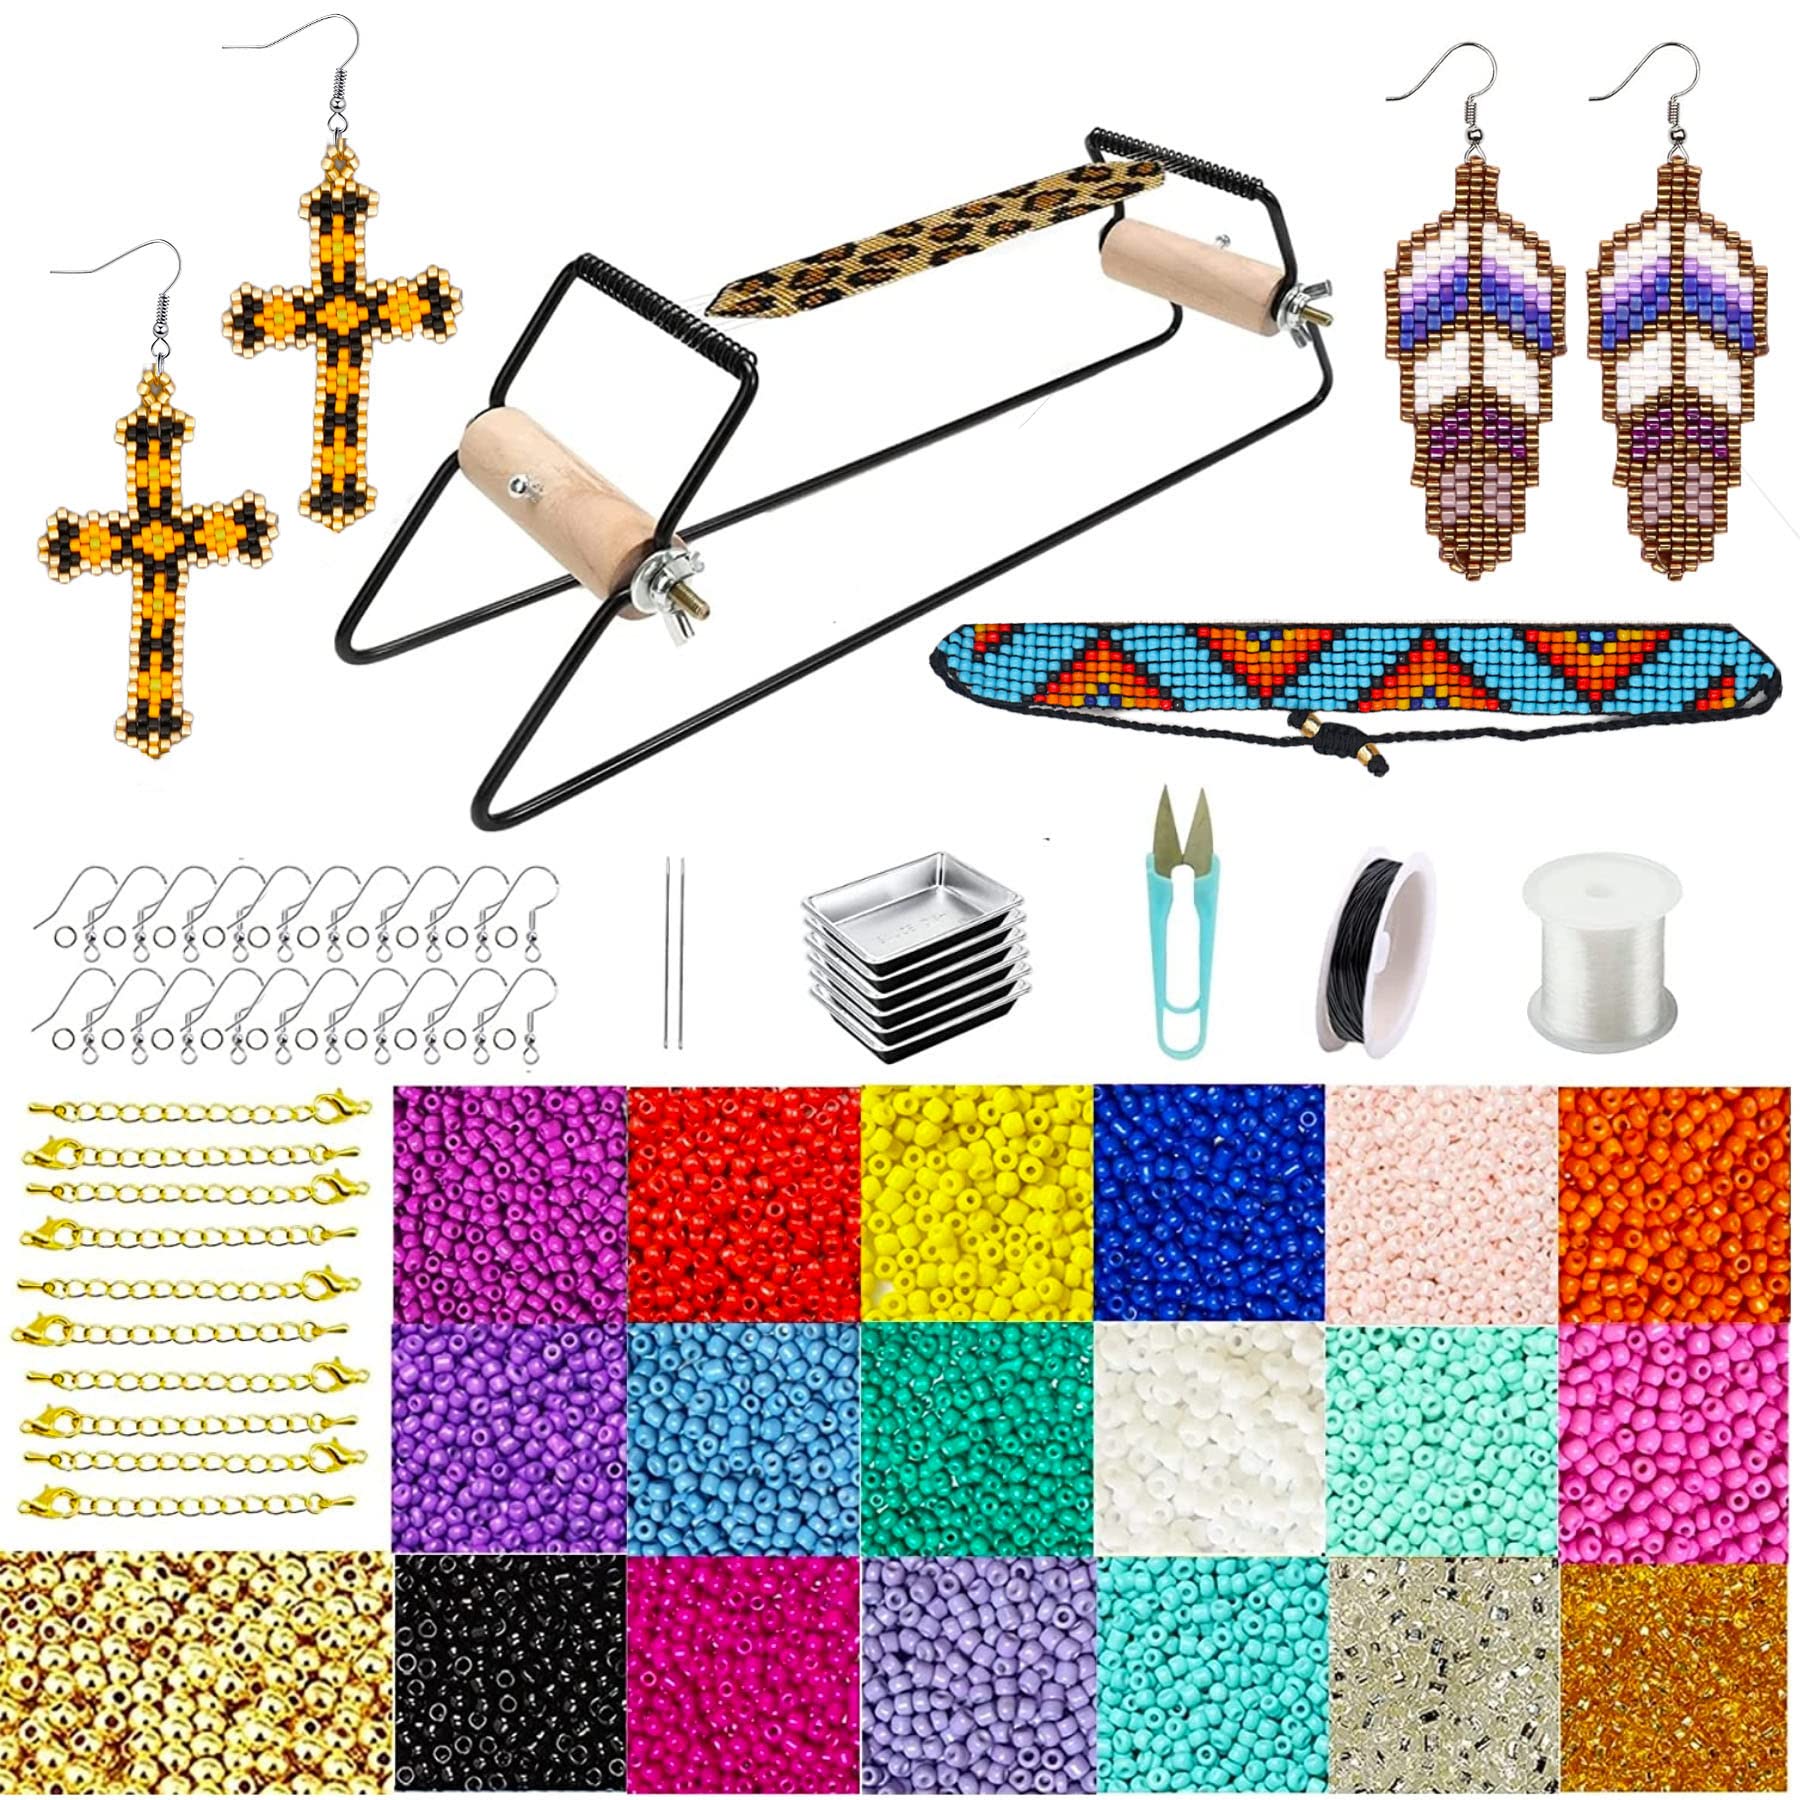 Wooden Bead Loom Kit, Beginners Bead Weaving Kit, Includes Beads, Thread,  Needles, DIY Bracelets and Necklaces, UK Shop 